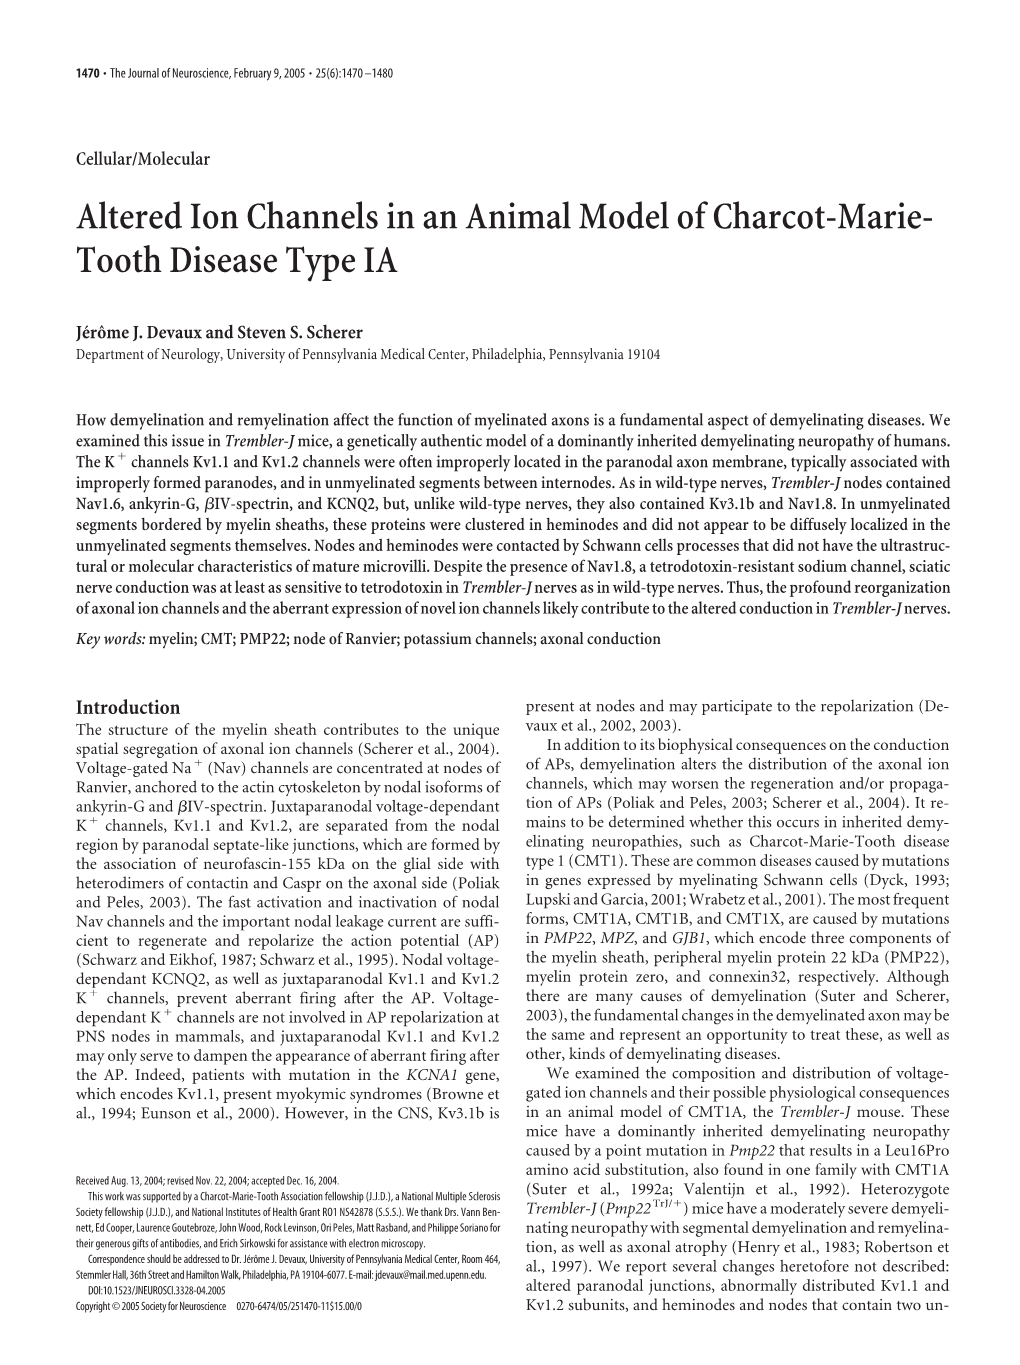 Altered Ion Channels in an Animal Model of Charcot-Marie- Tooth Disease Type IA